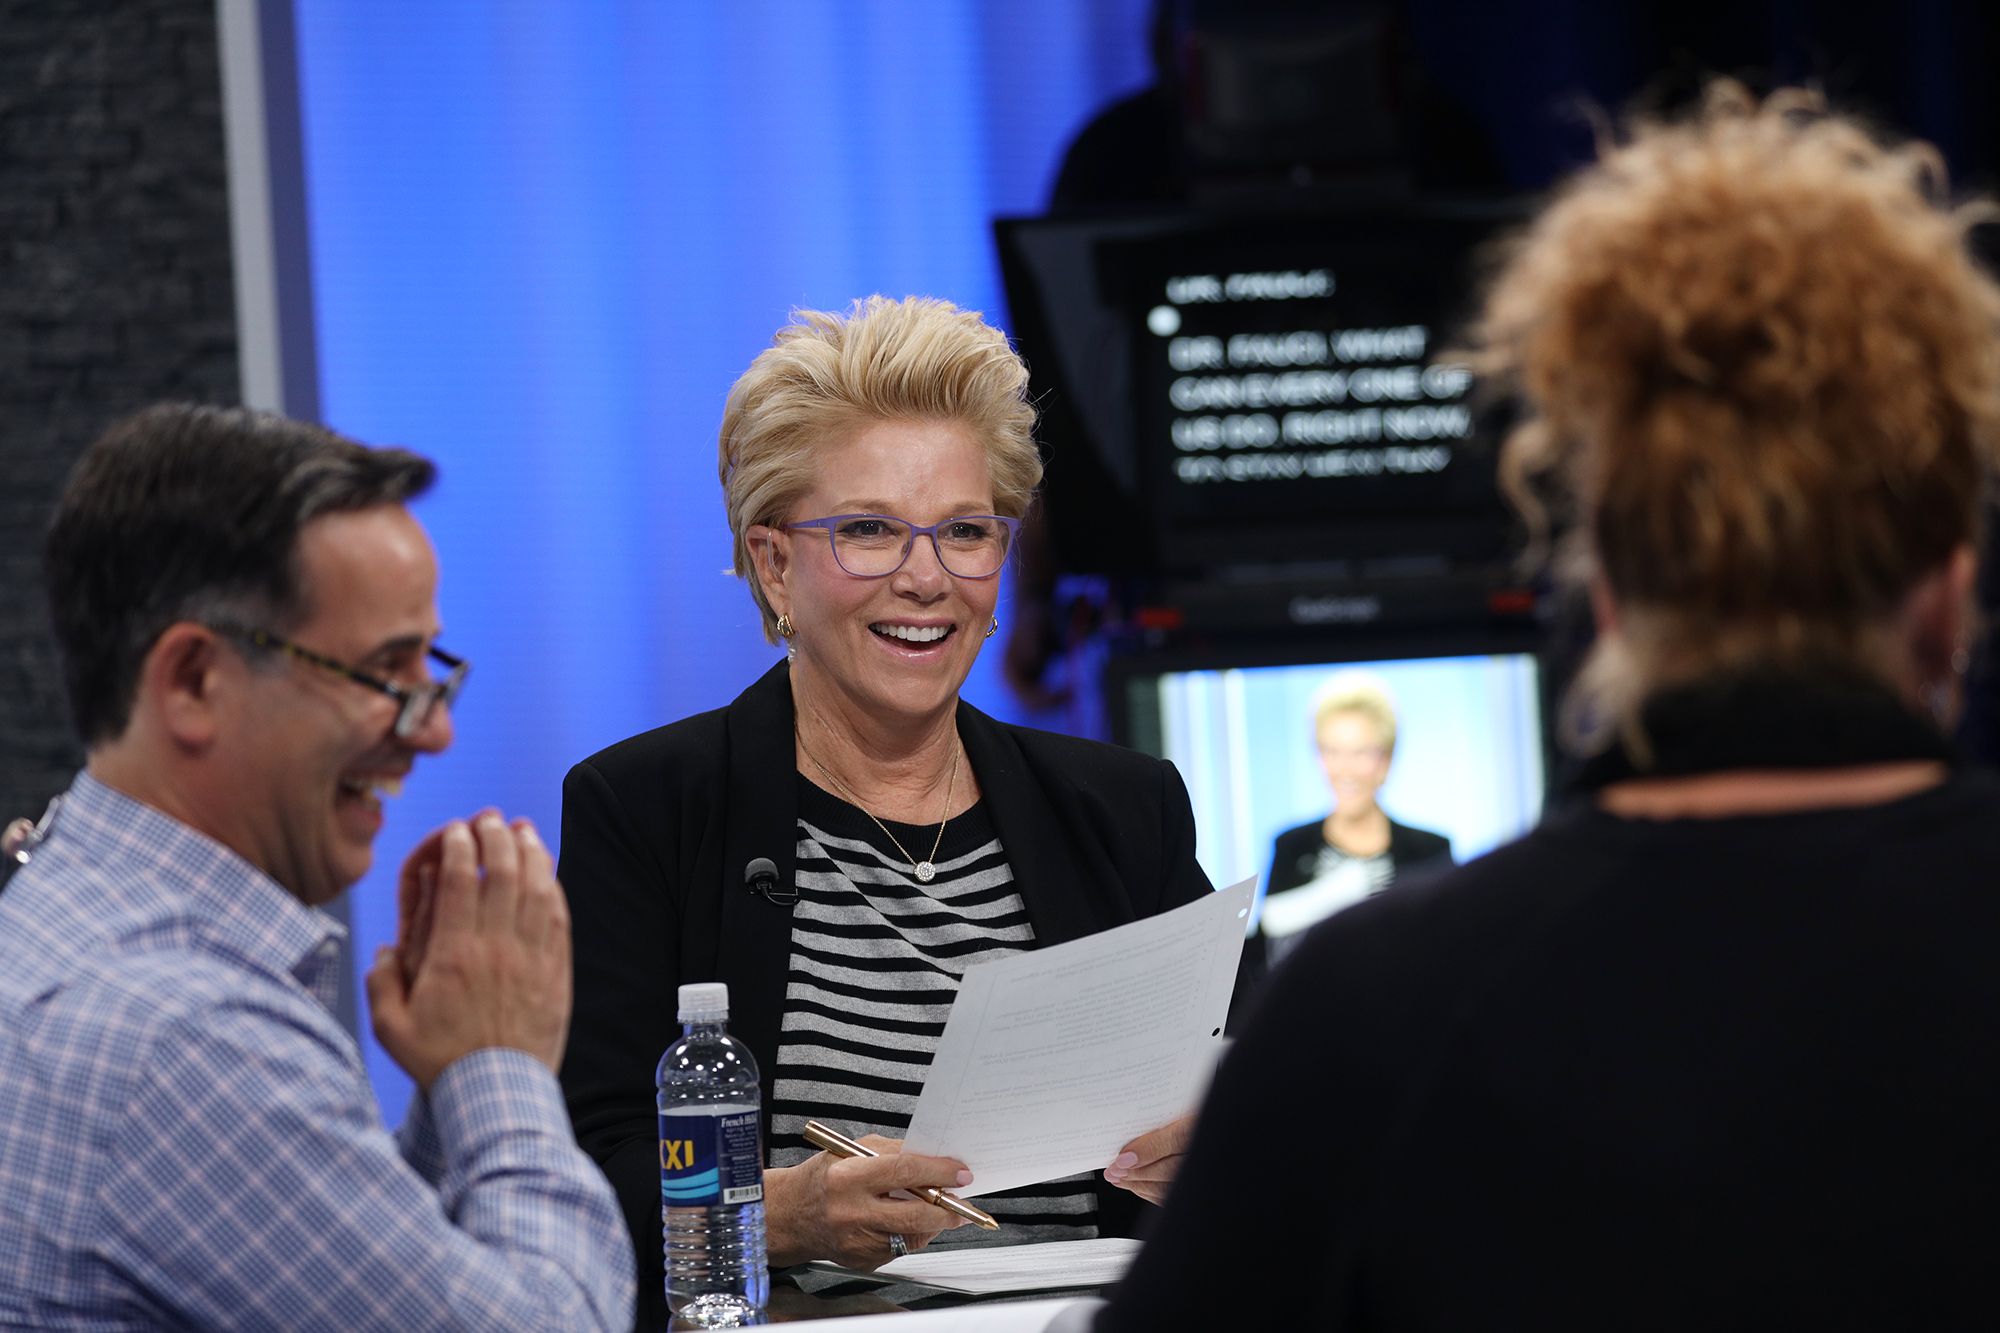 A white woman with short blonde hair gray rimmed glasses, a Black and white shirt with Black blazer smiles at at the woman across from her. A man sits in the middle of the two laughing. He has short Black hair and is wearing glasses.